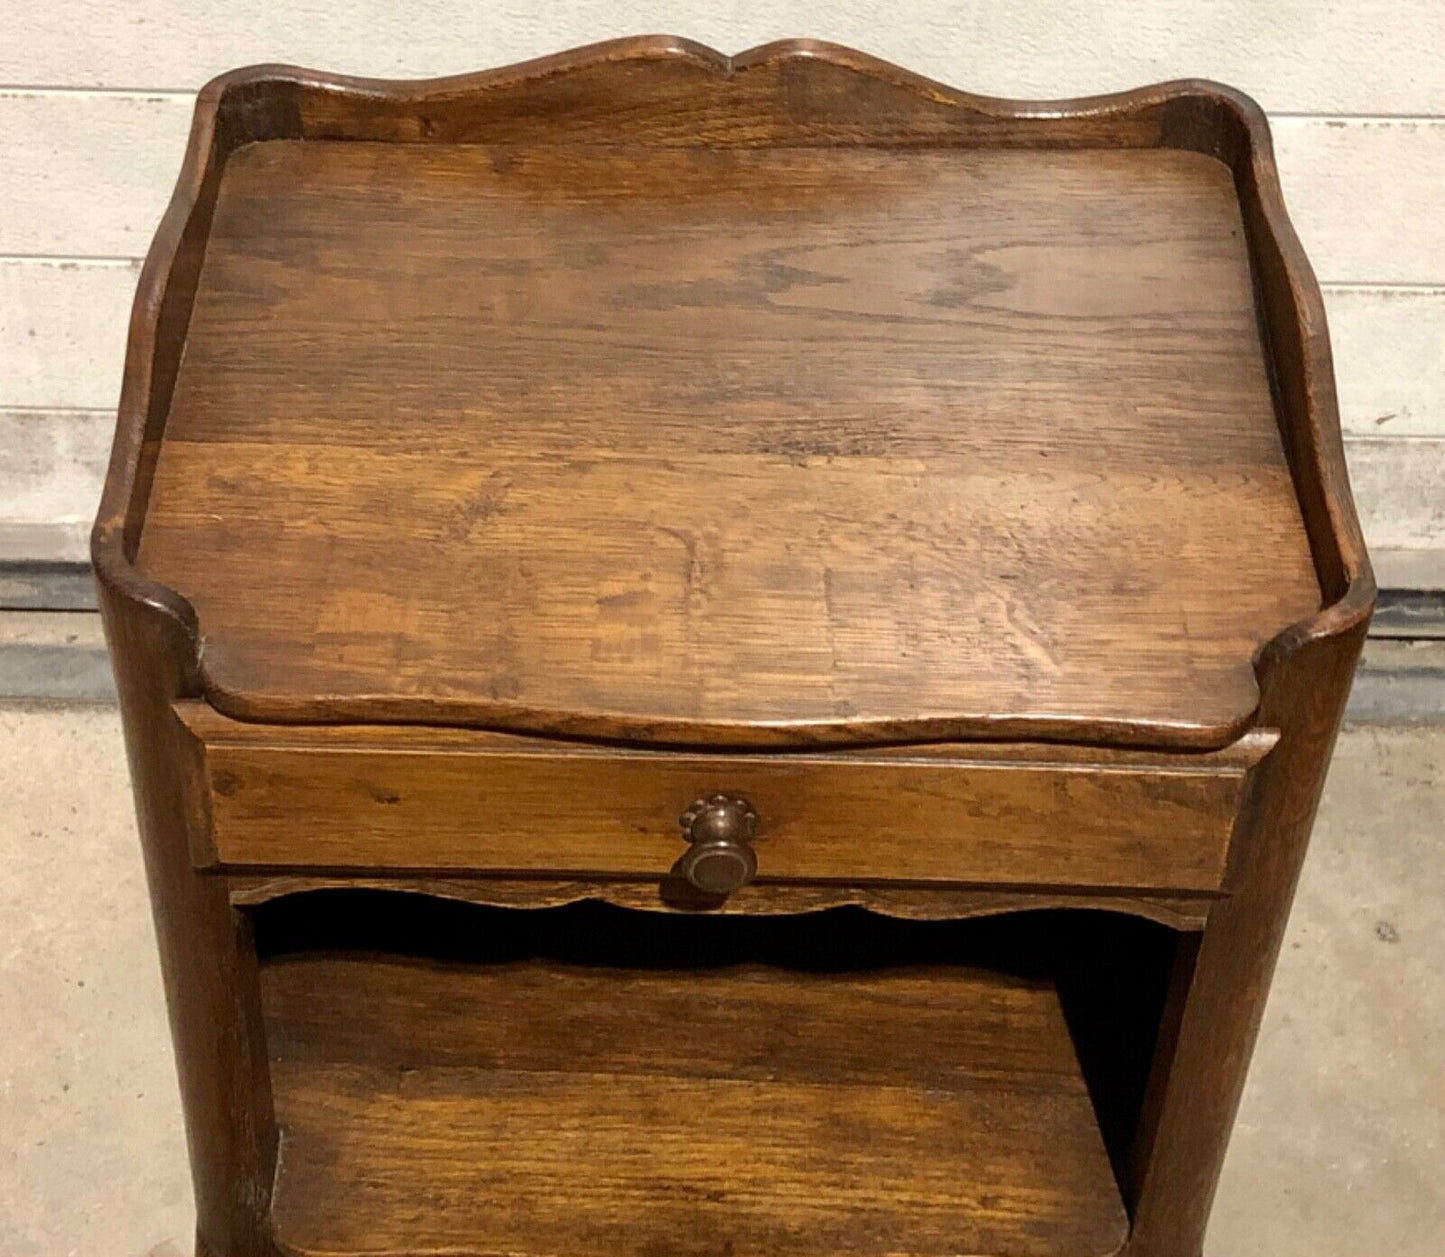 000766....Handsome Pair Of Antique French Oak Bedside Tables / Nightstands( sold )